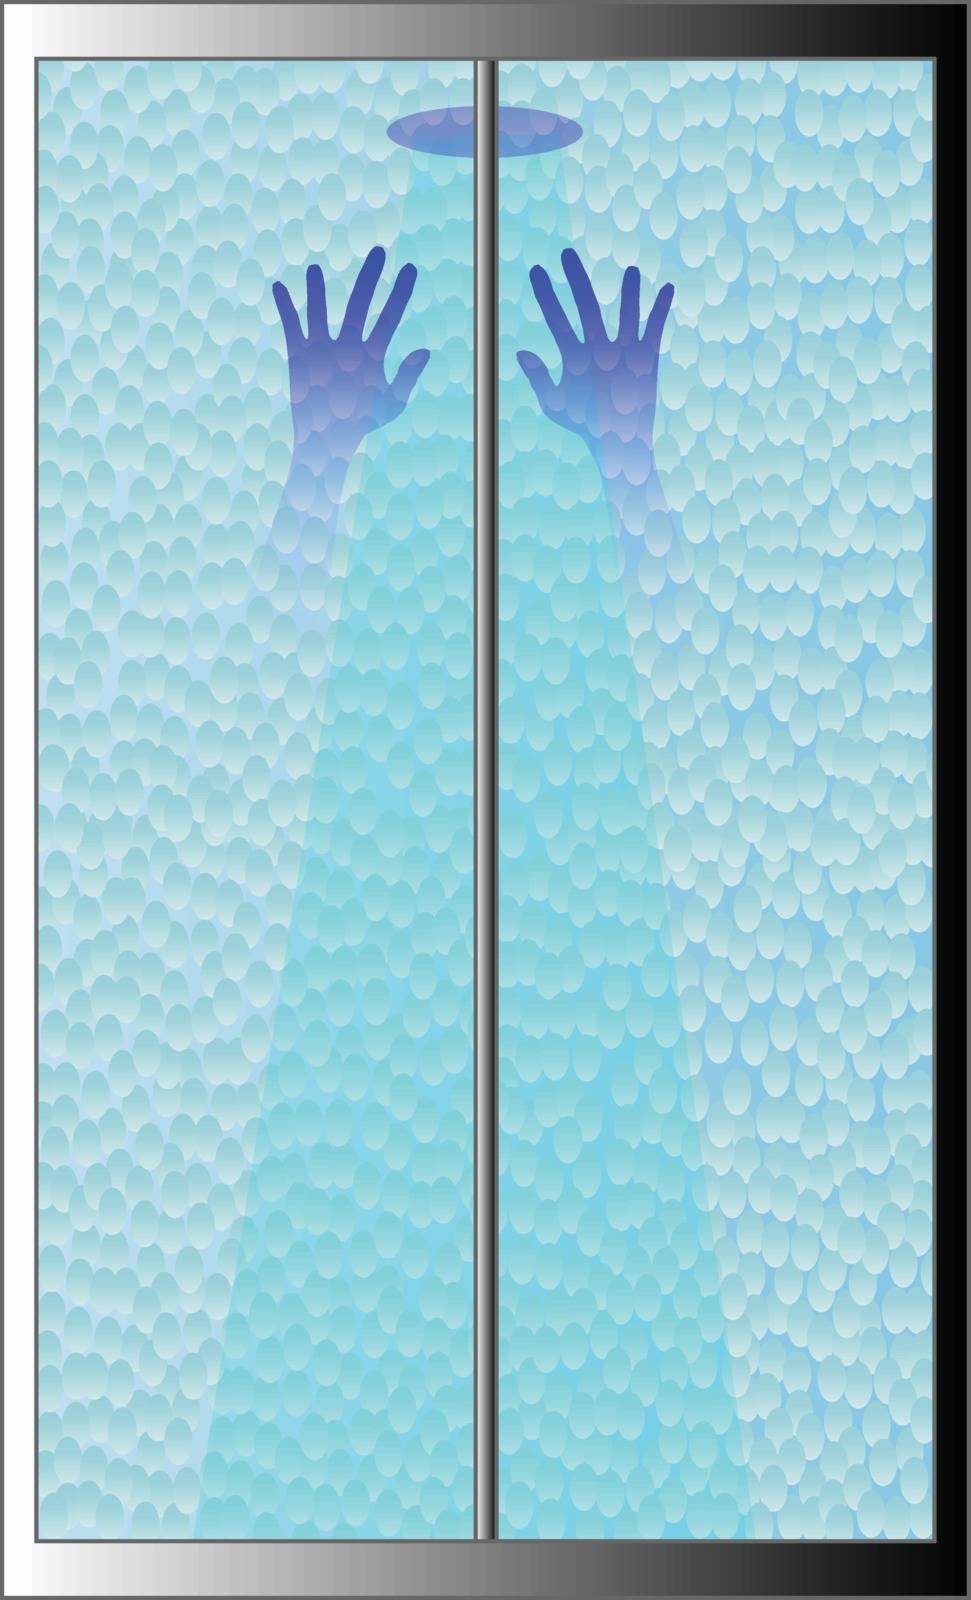 A shower screen with the a pair of hands on the glass